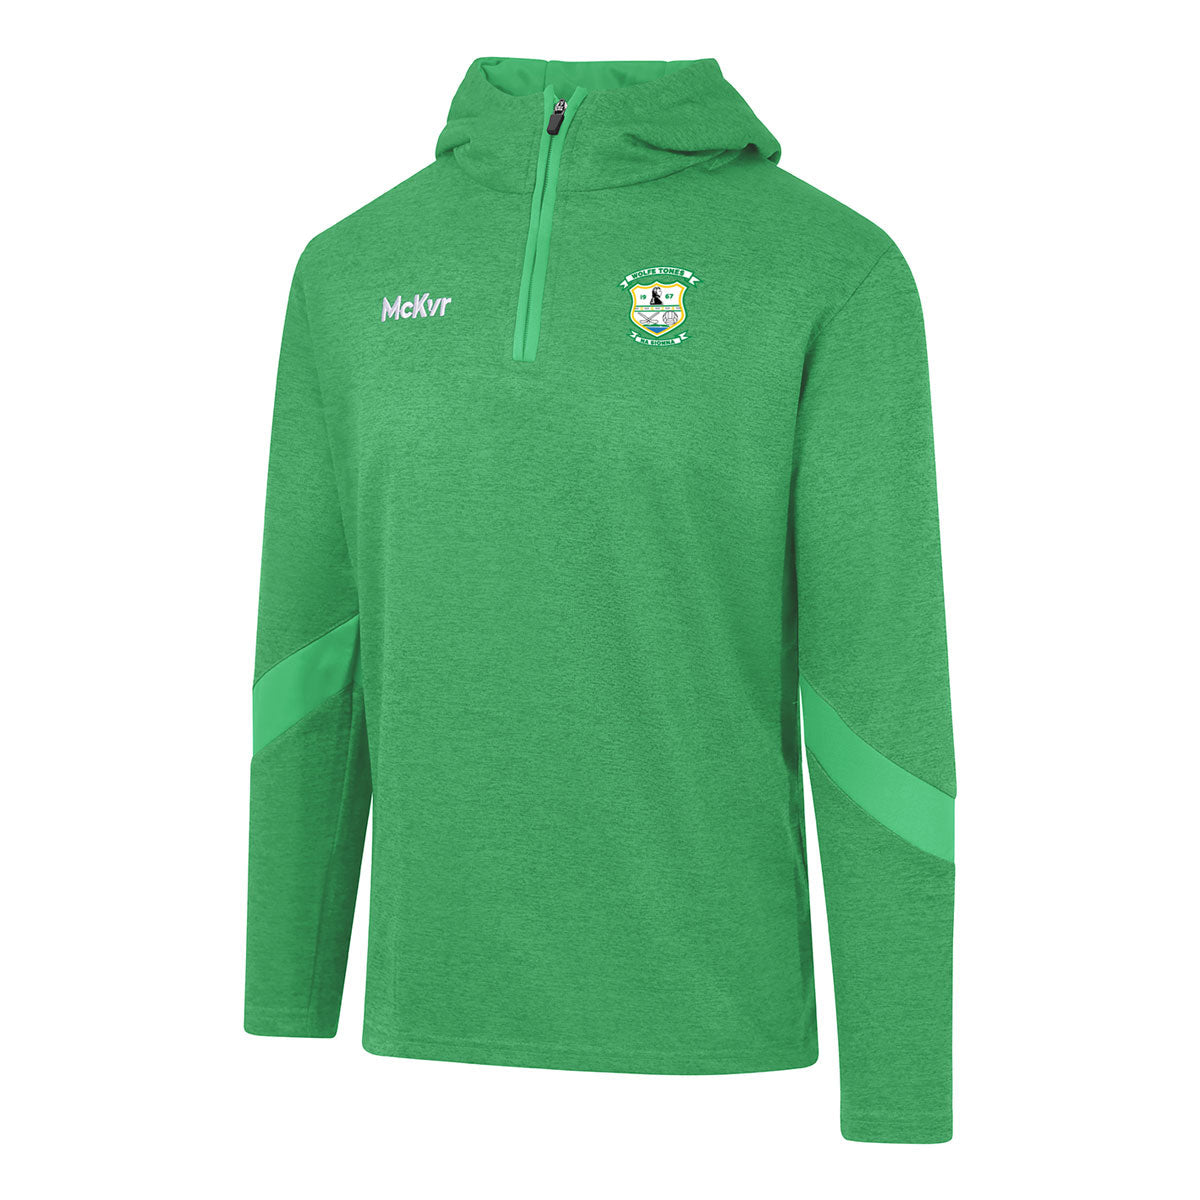 Mc Keever Wolfe Tones Na Sionna, Clare Core 22 1/4 Zip Hoodie - Youth - Green